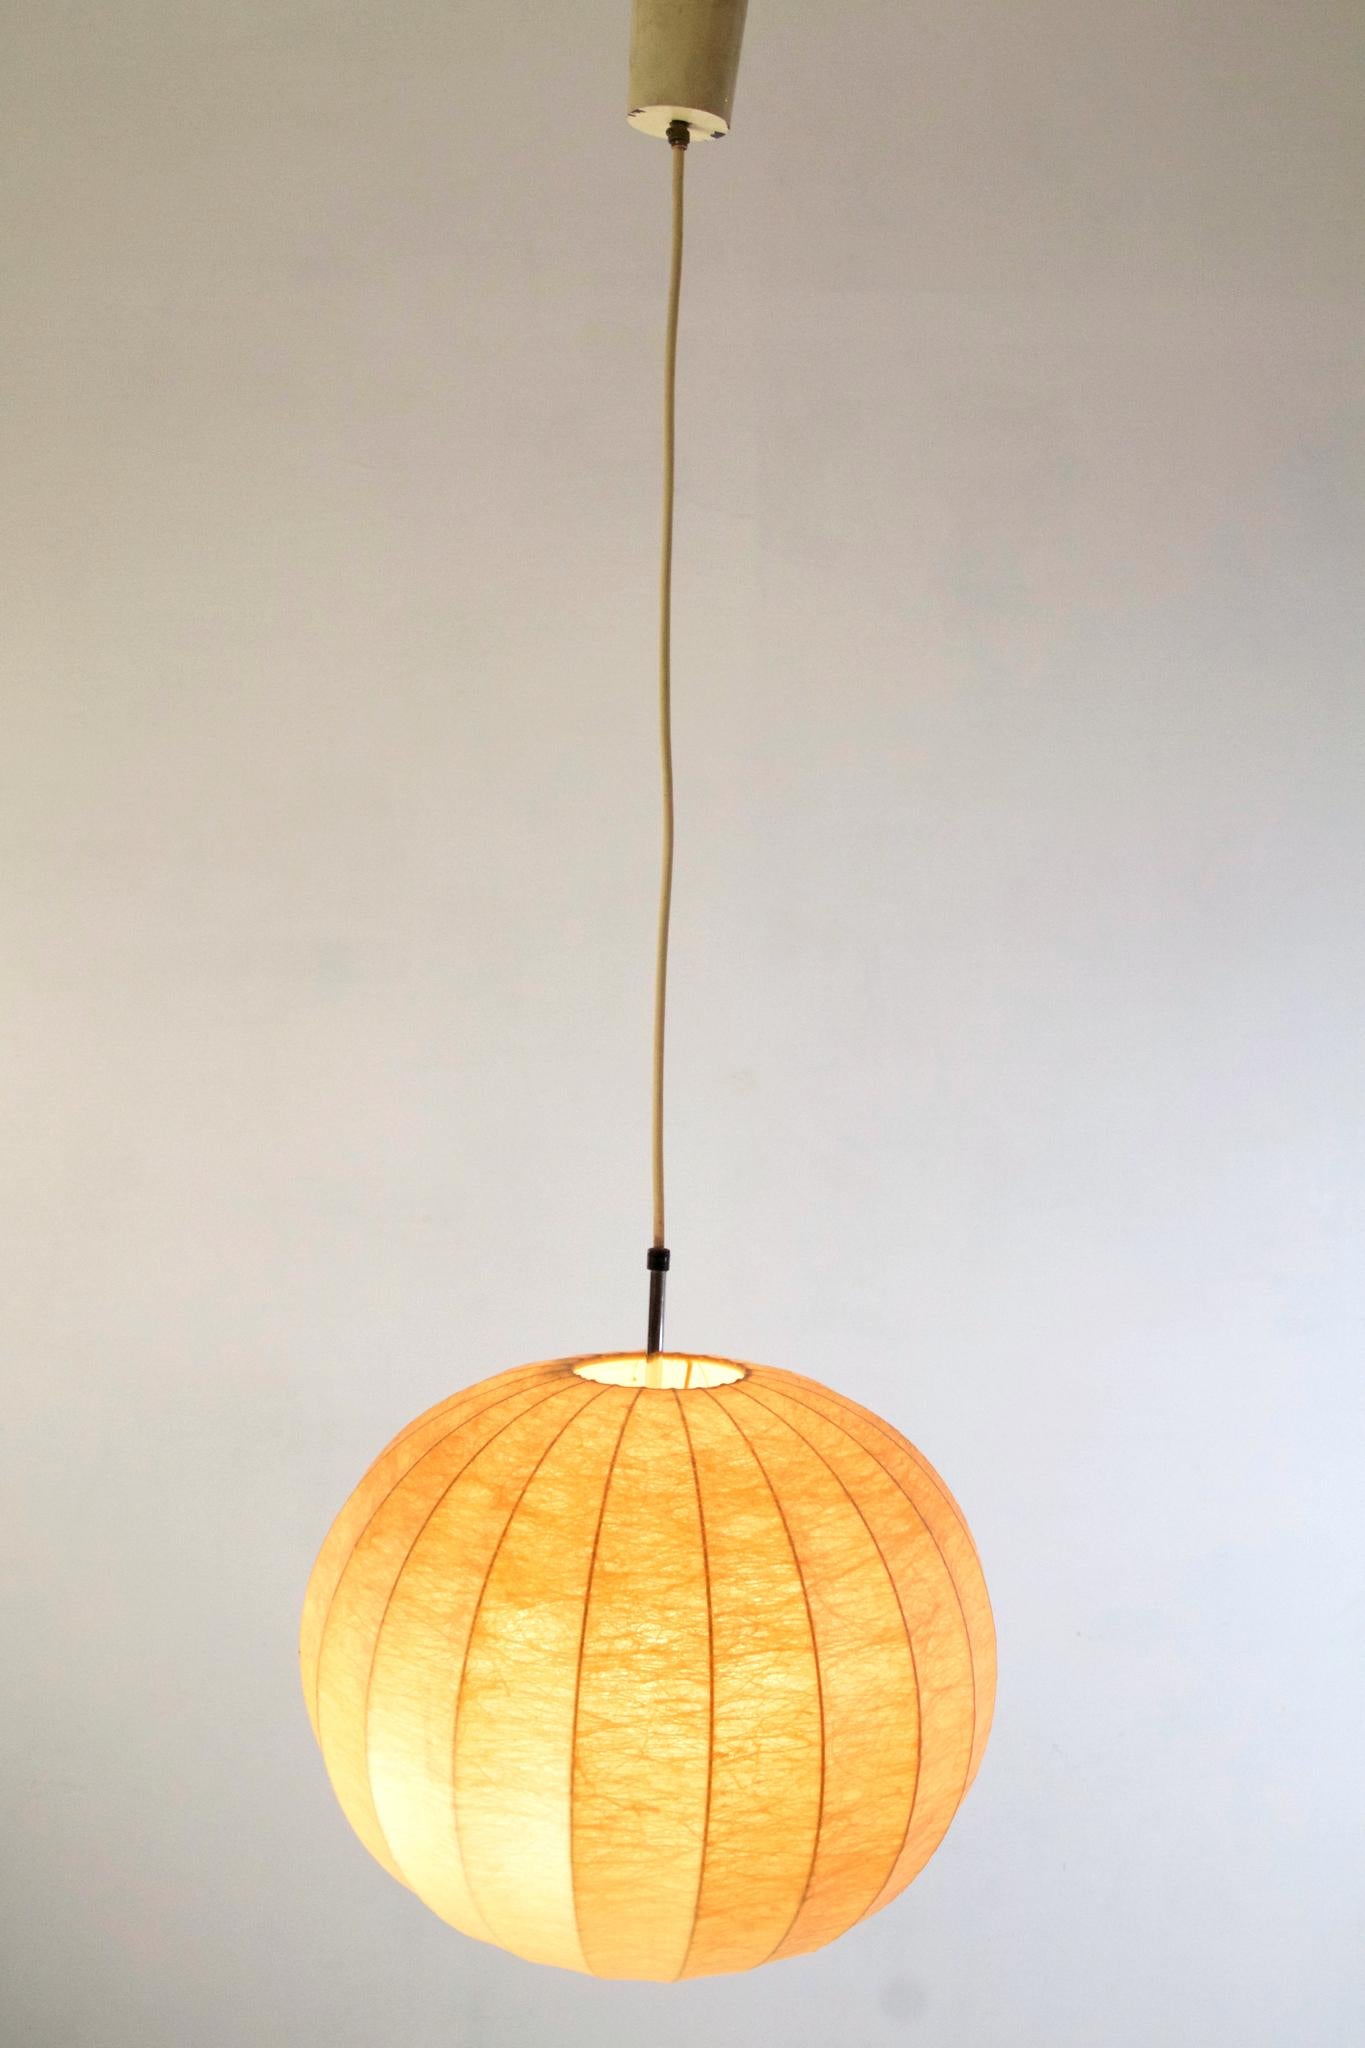 An original 1960s Cocoon pendant by Achille and Pier Giacomo Castiglioni. The lamp has one small older damage to the cover see pics.